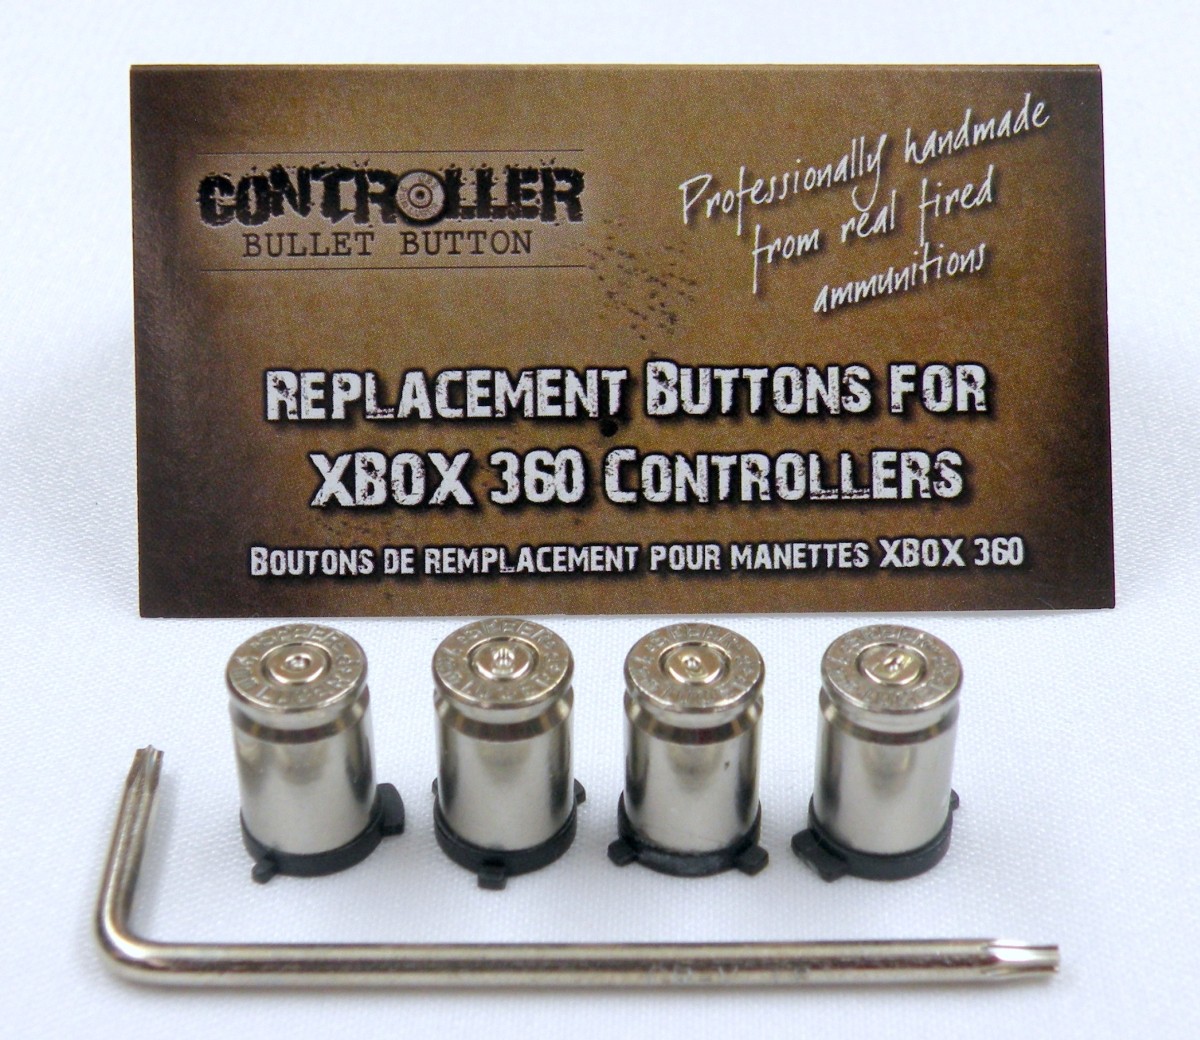 ABXY Bullet Buttons Nickel+Nickel for XBOX 360 Controller w/ Torx L key